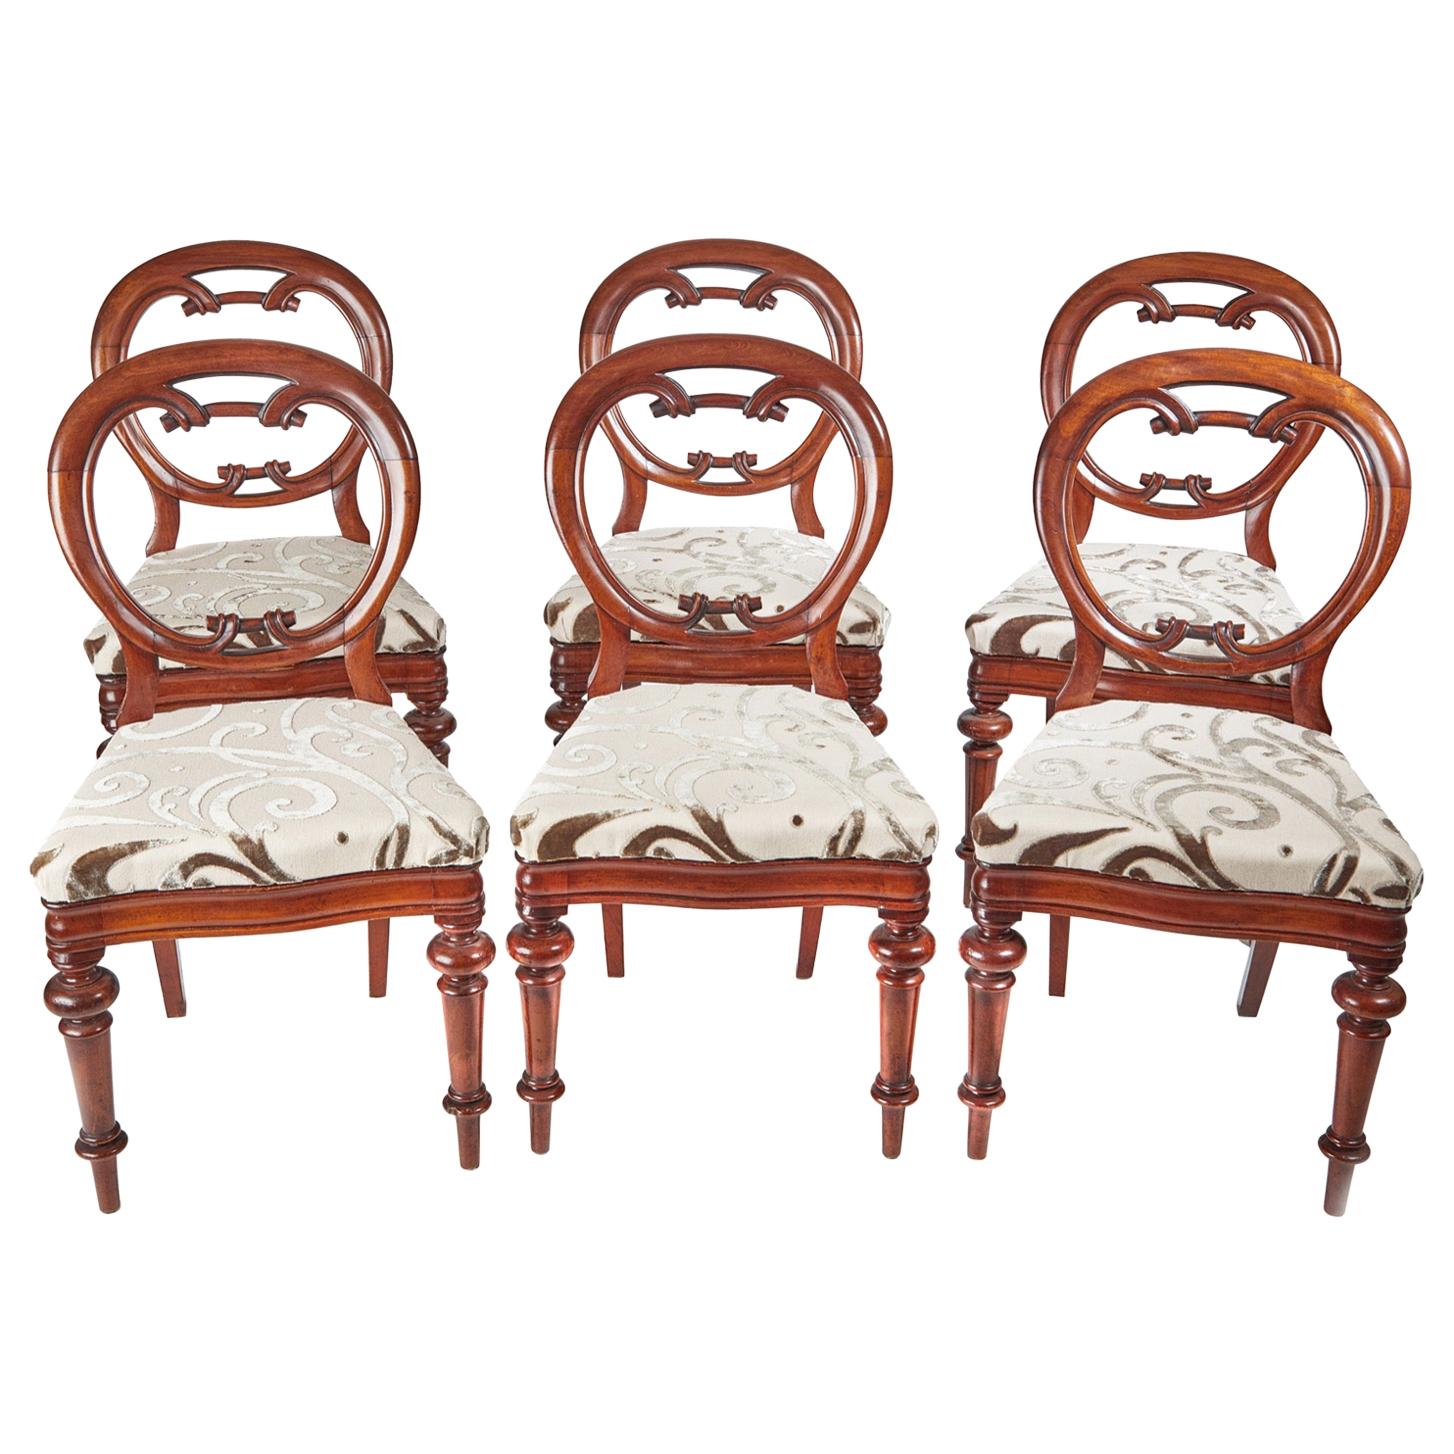 Superb Set of 6 Antique Victorian Mahogany Balloon Back Chairs